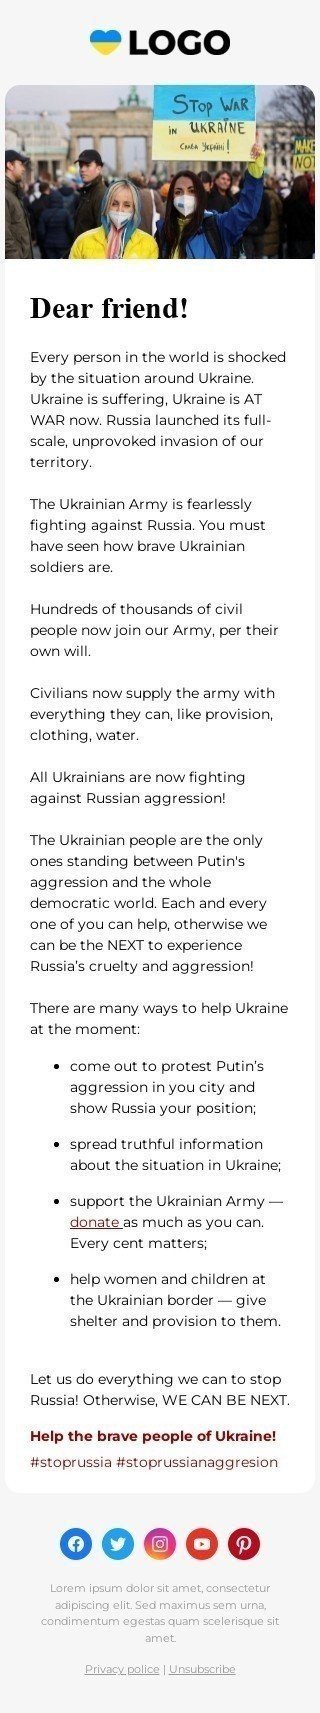 The "Stop Russian Aggression" email template mobile view